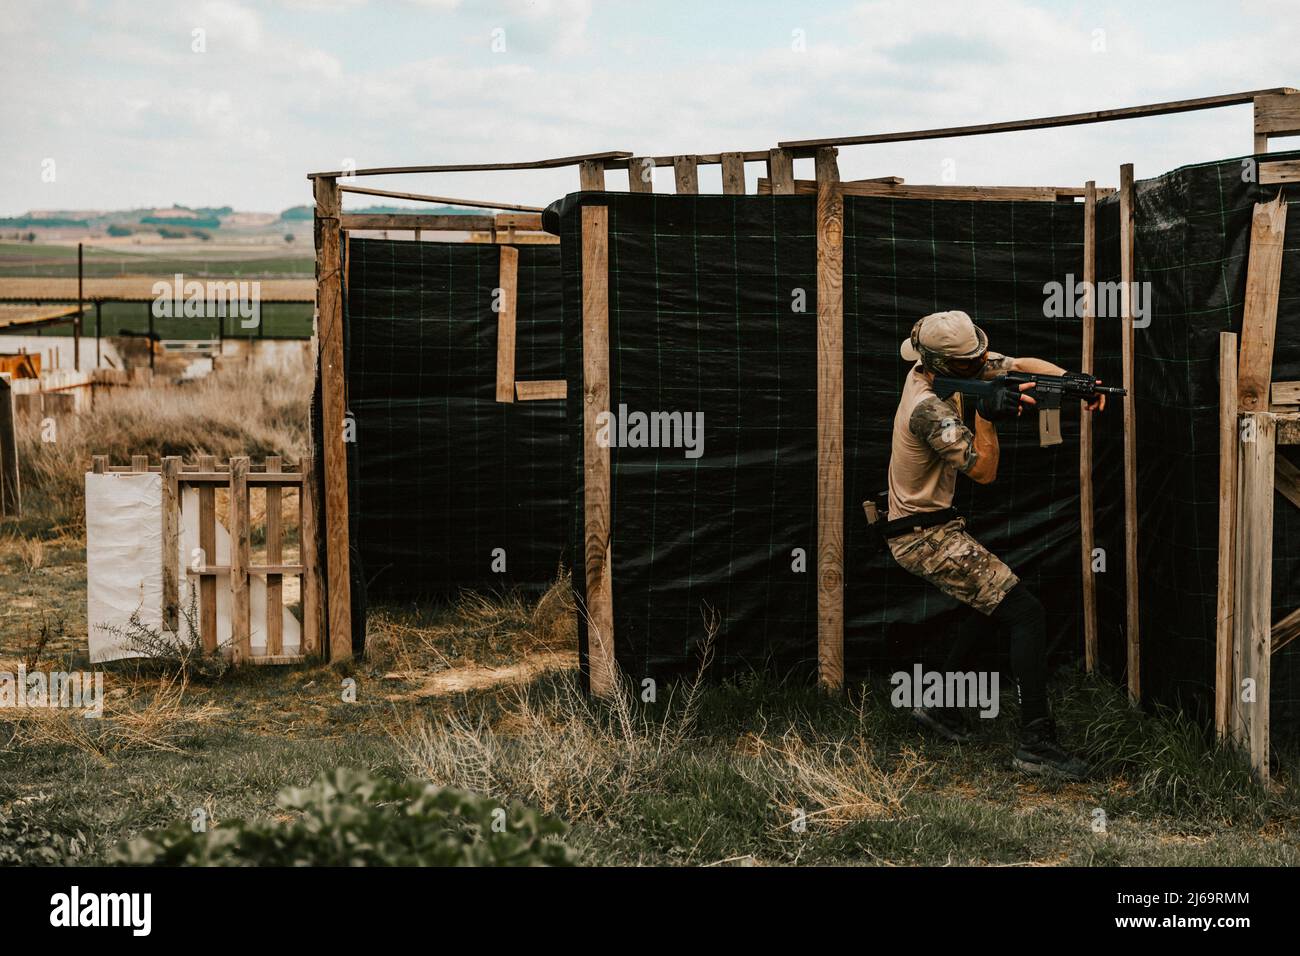 Soldiers carefully advancing position in the middle of an airsoft game Stock Photo